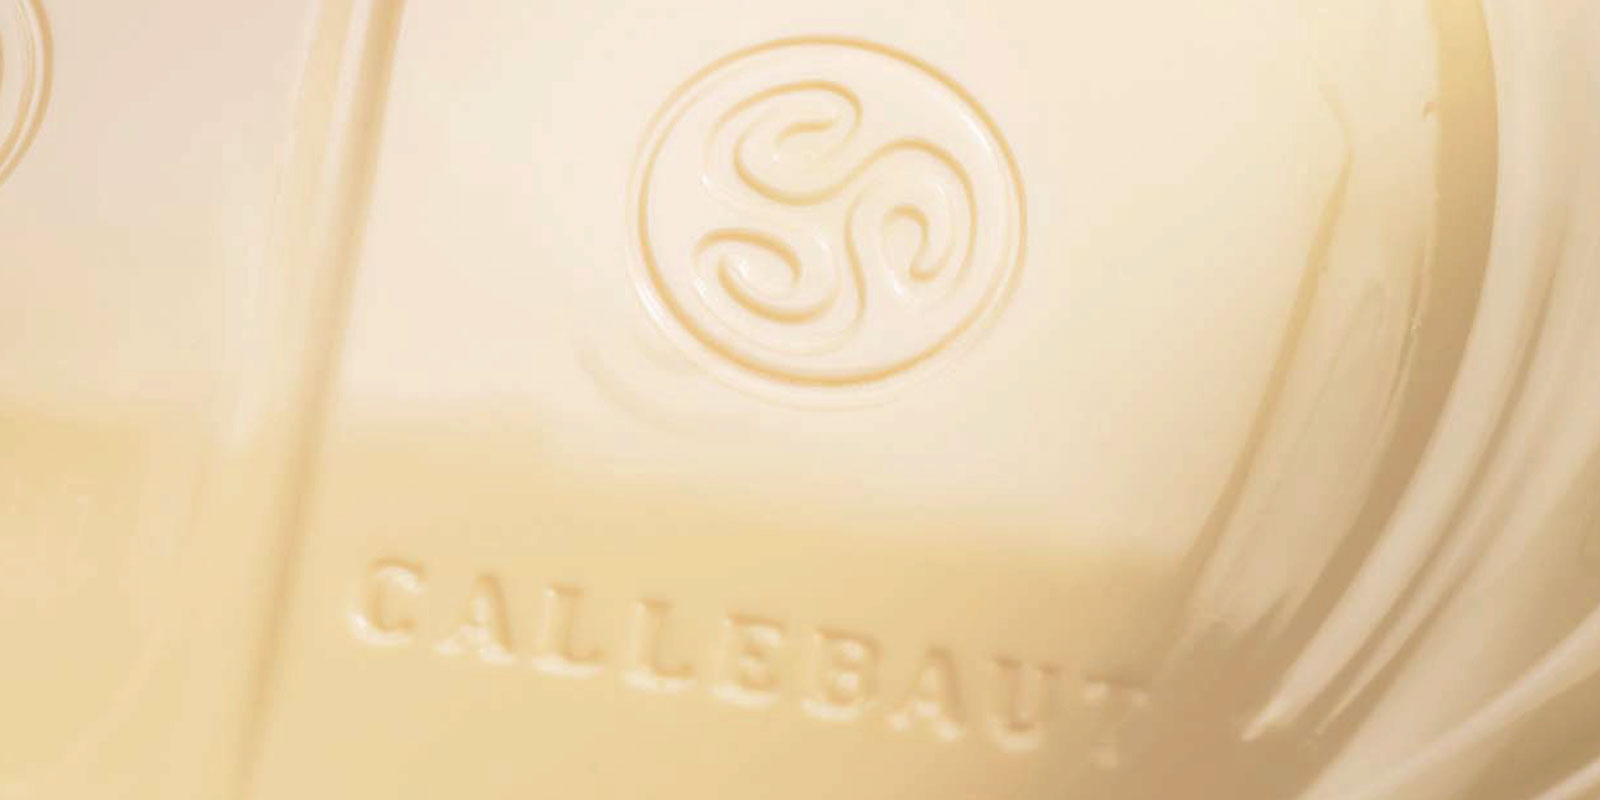 White chocolates from Callebaut White chocolate is the result of mixing cocoa butter, milk powder and sugar. The mixing ratio of these ingredients - for example vanillin, vanilla or lecithin - determines the taste of the end product.